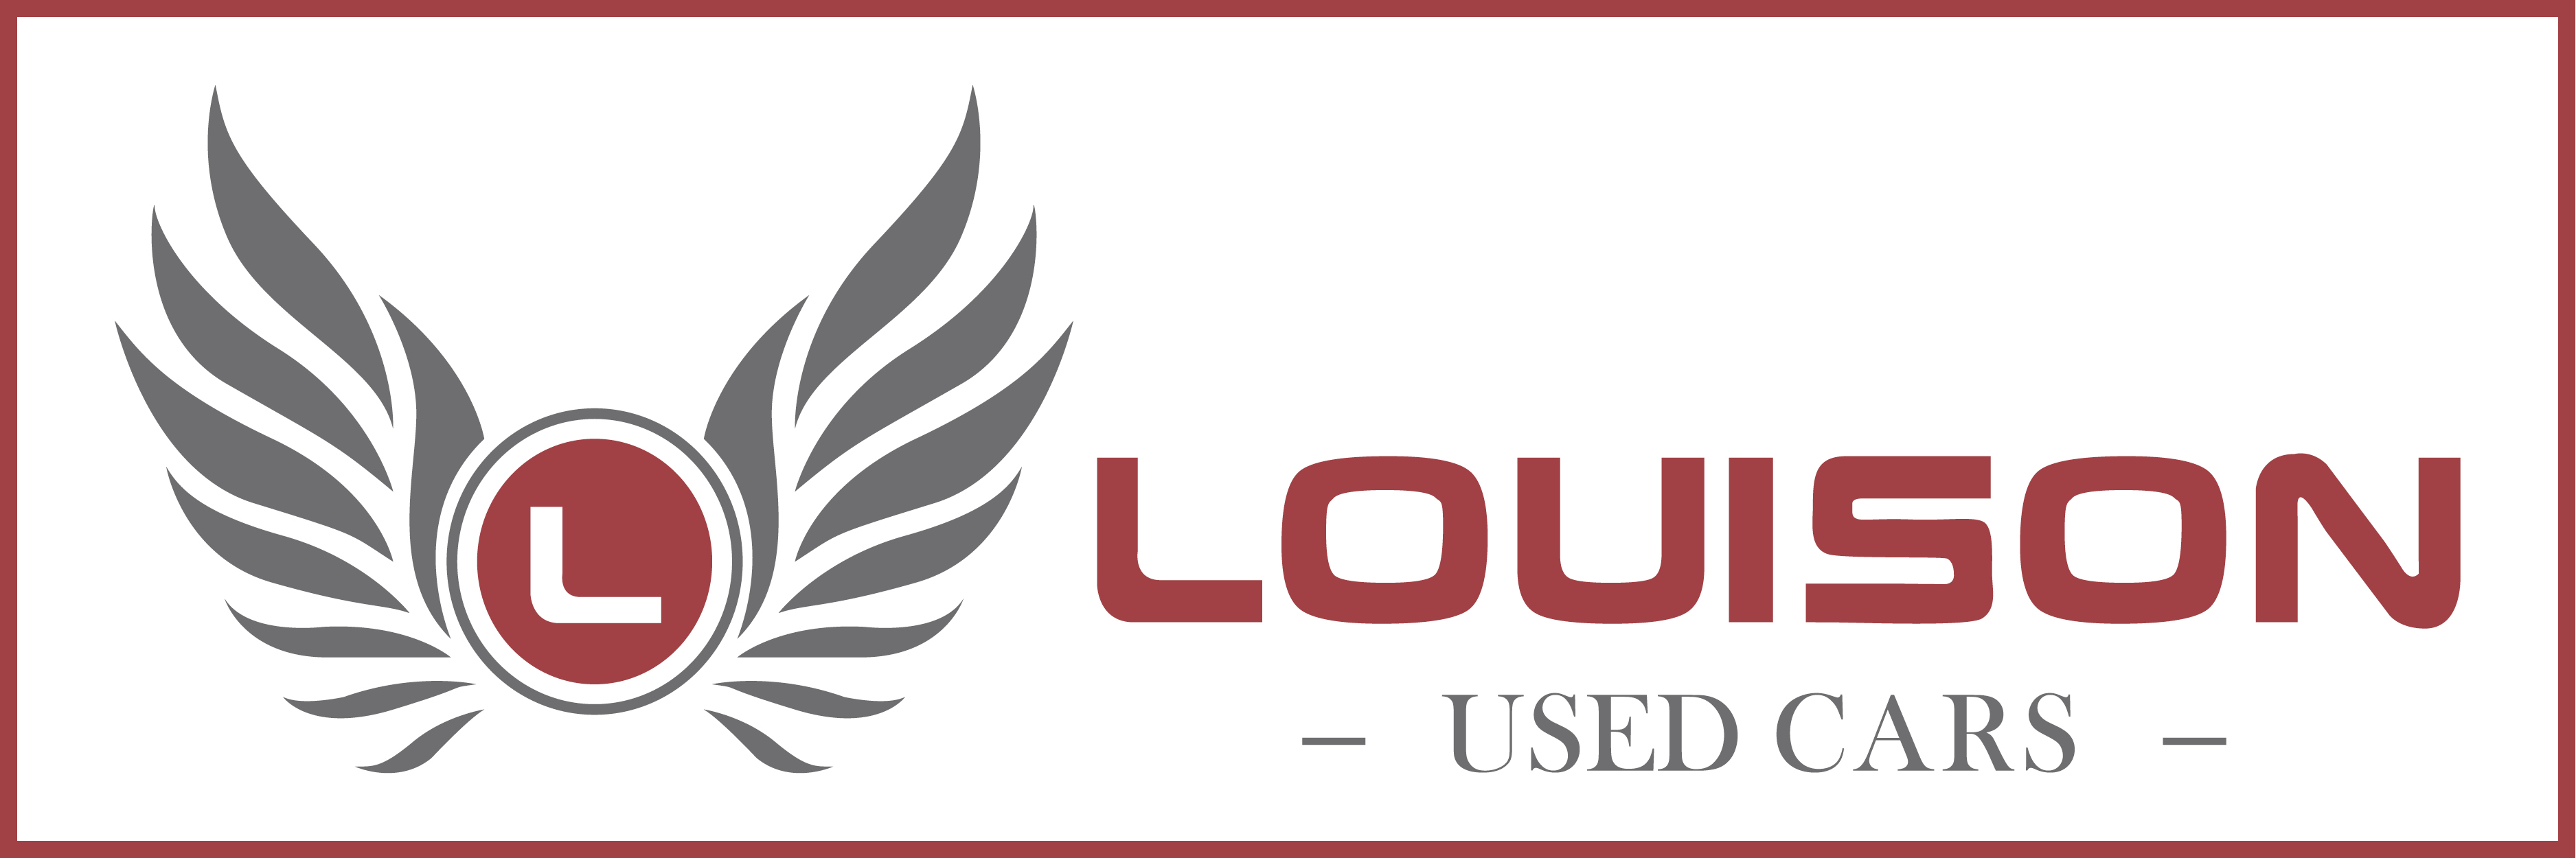 Louison Used Cars